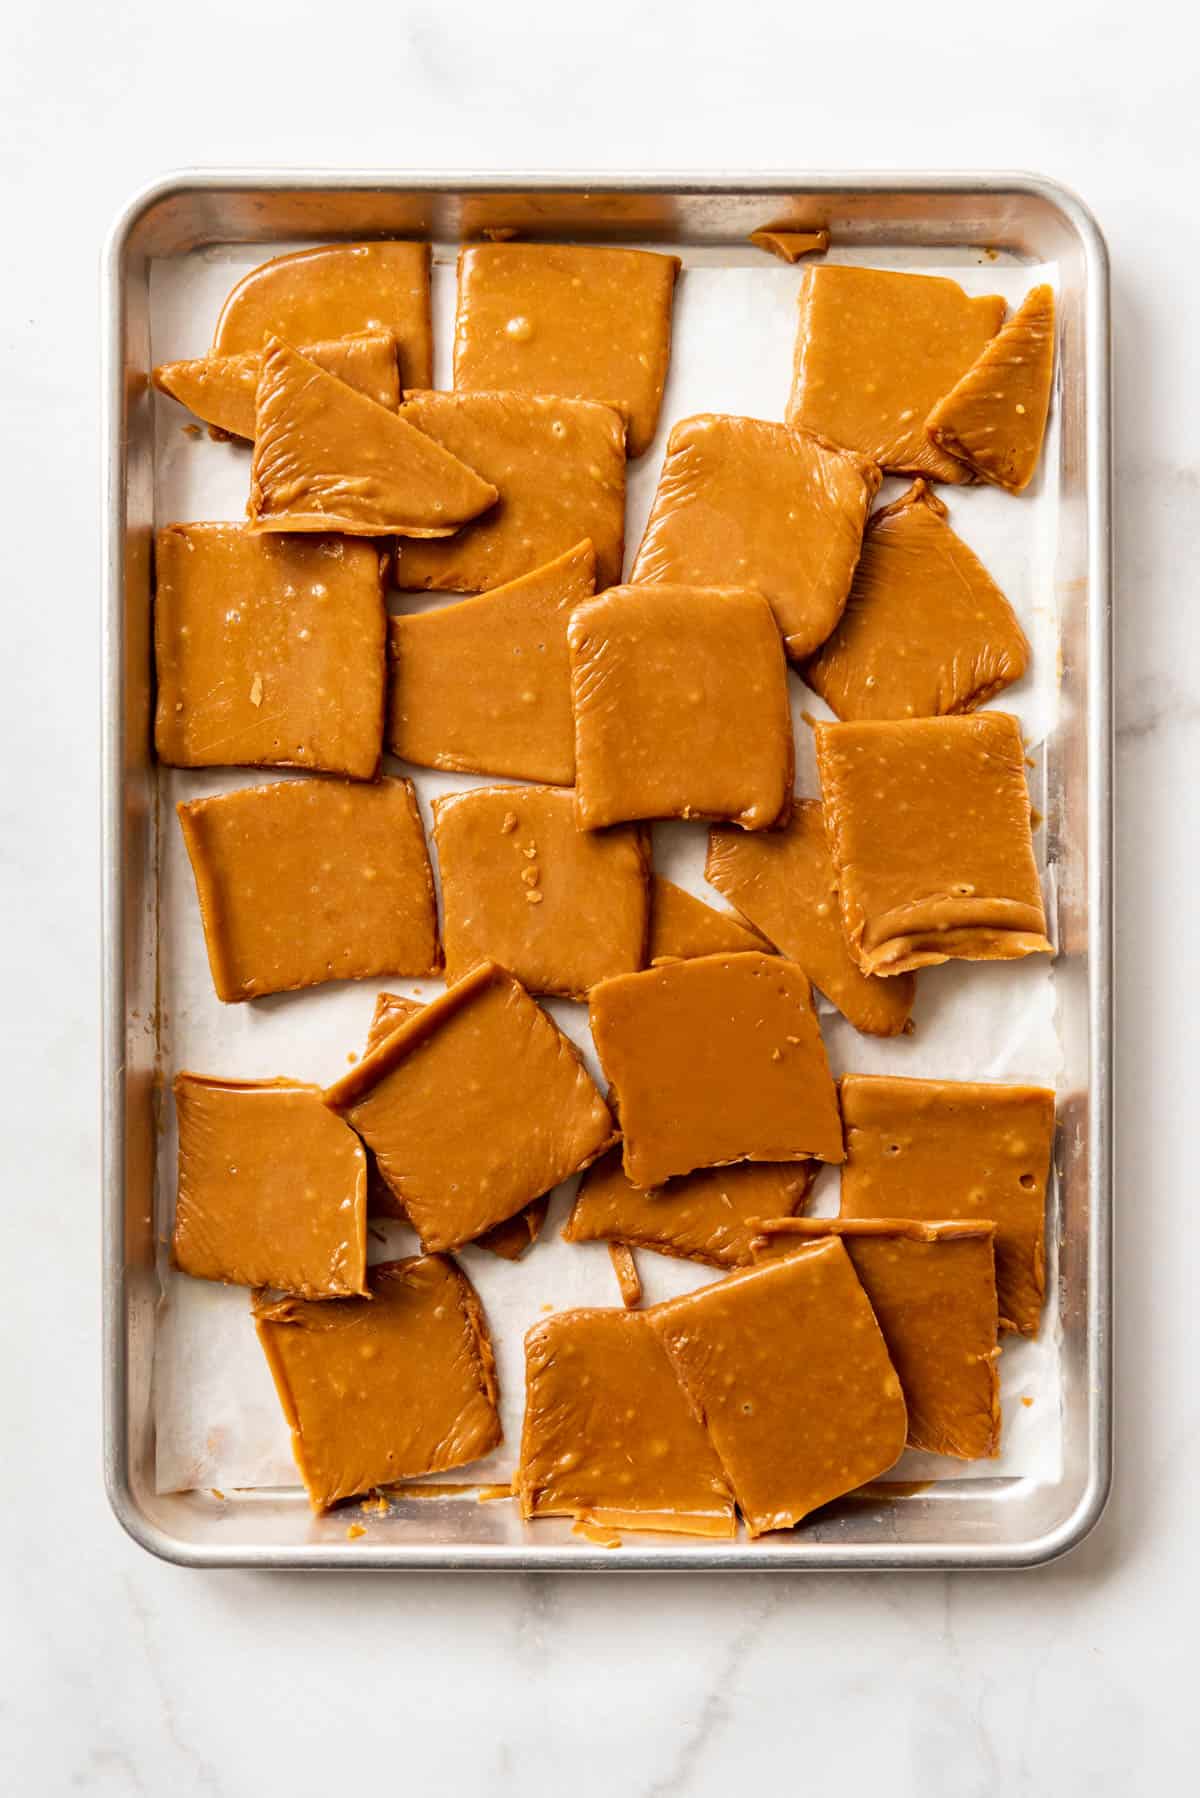 An image of churro toffee squares cut up in a baking sheet.